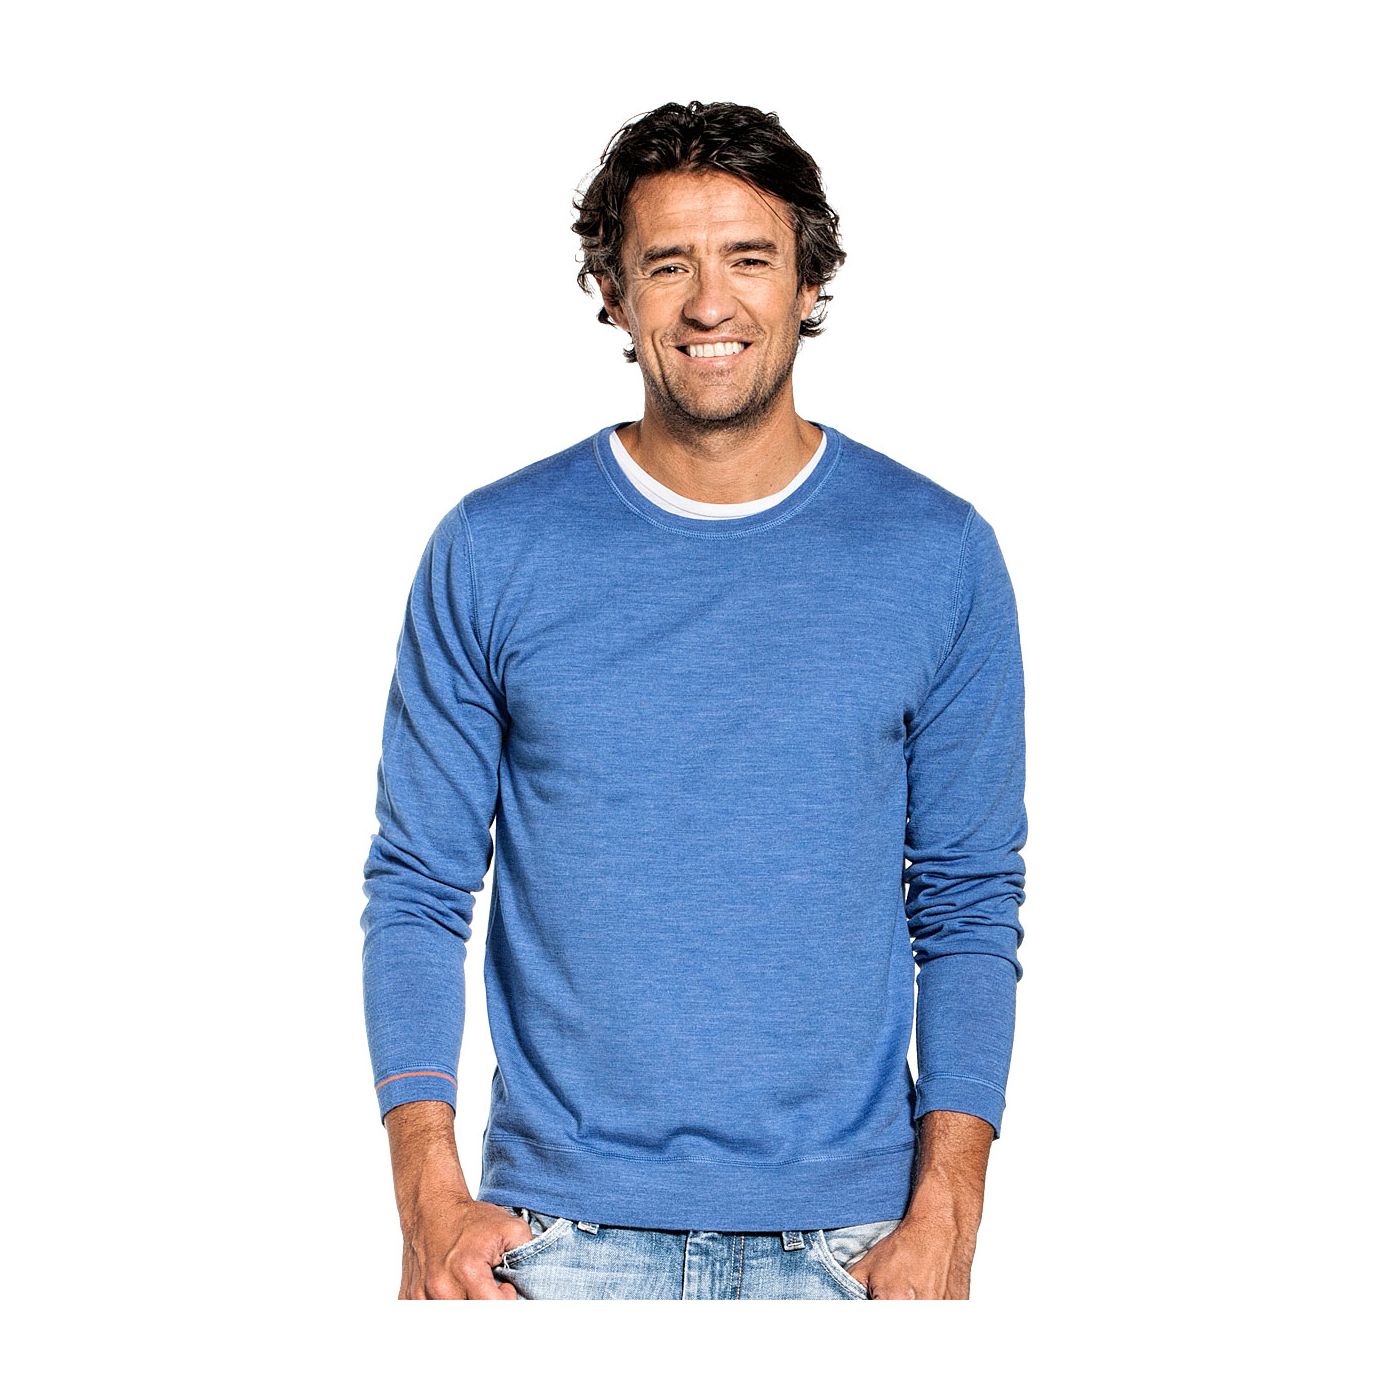 Crew neck pullover for men made of Merino wool in Bright blue